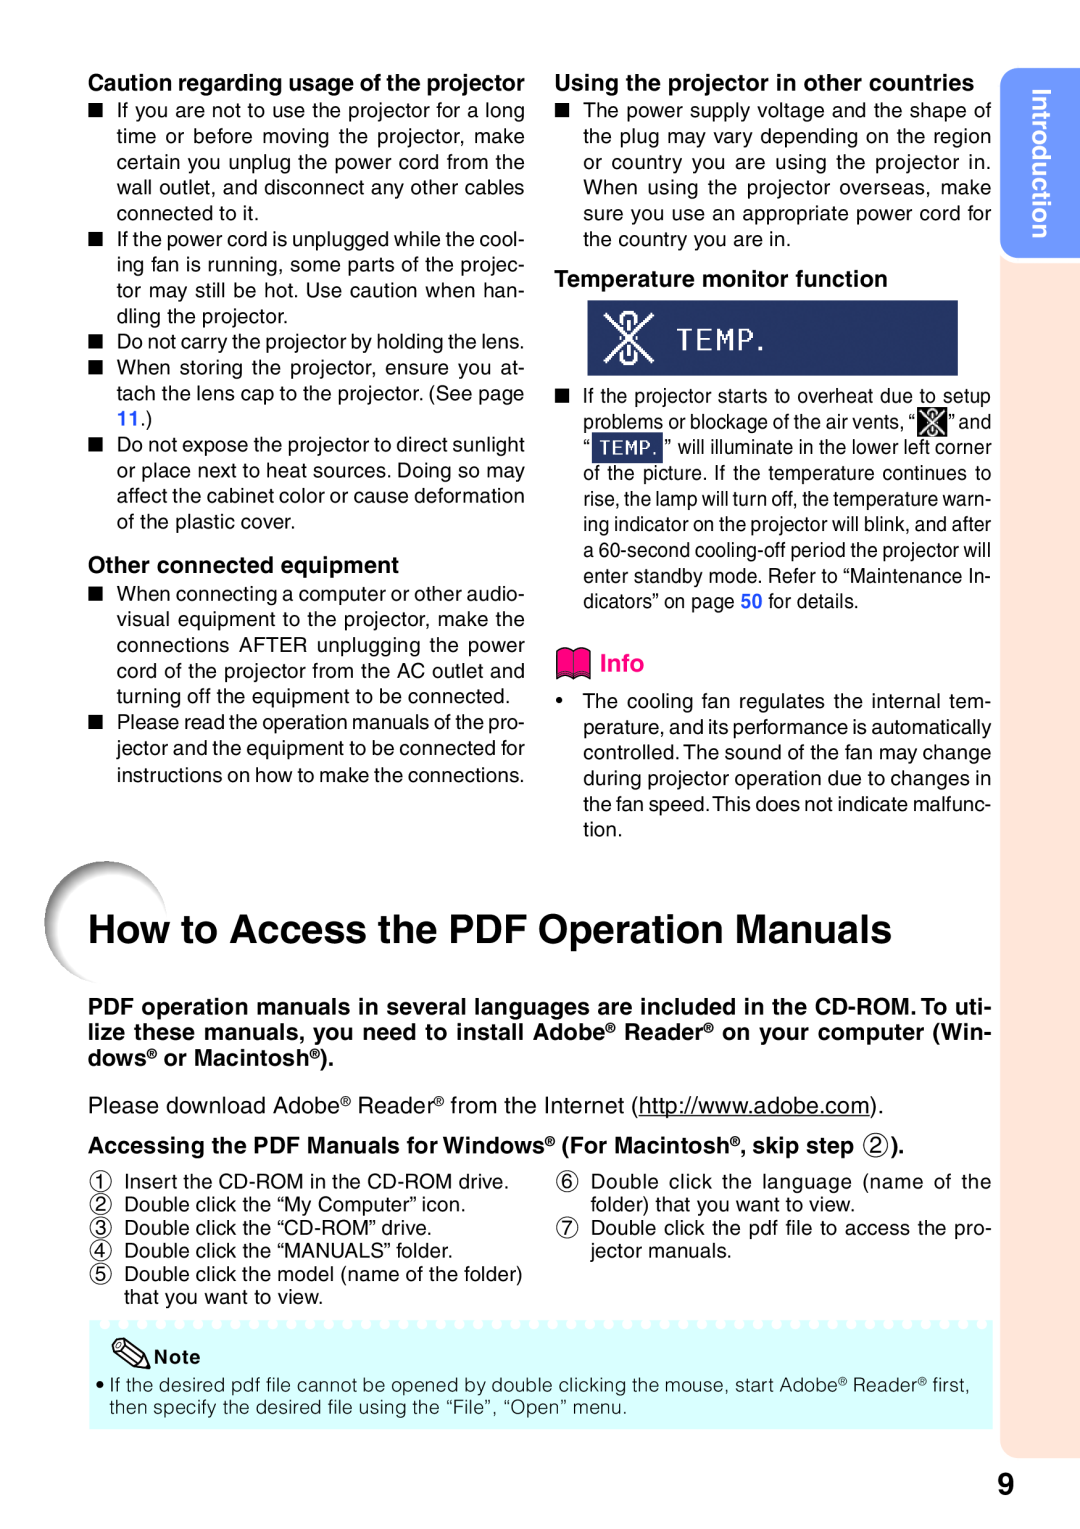 Sharp XR-32X How to Access the PDF Operation Manuals, Info, Introduction, Caution regarding usage of the projector 